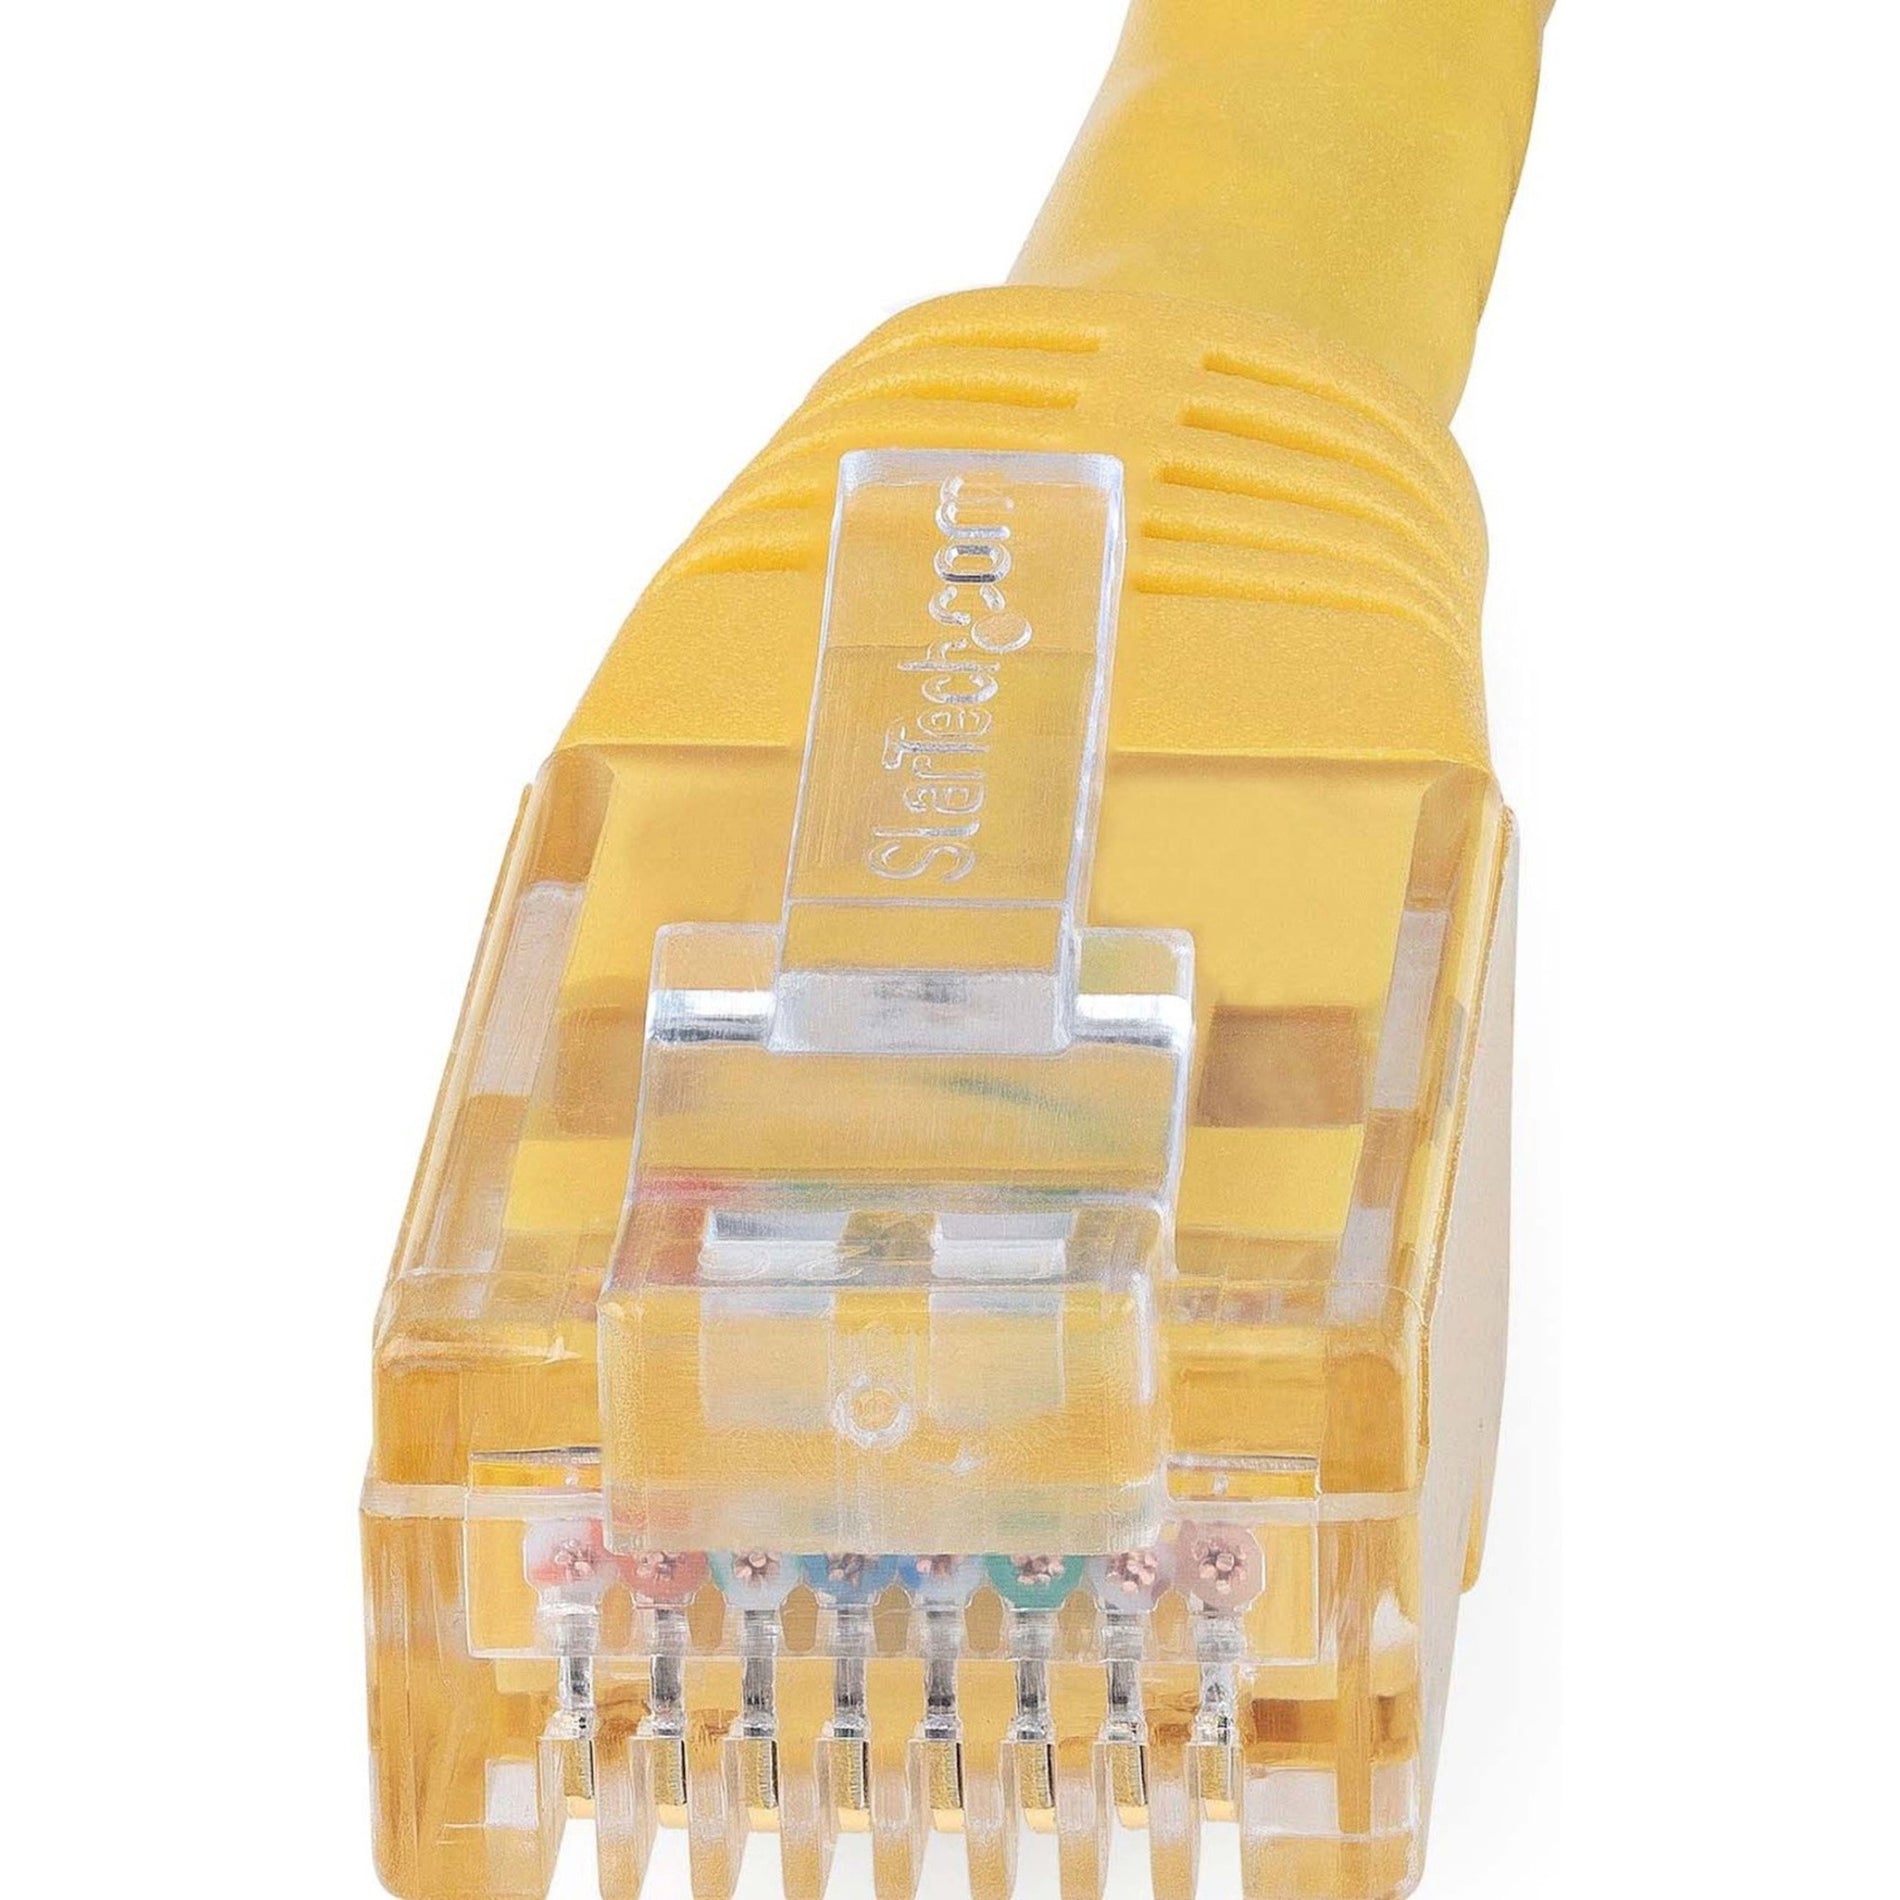 StarTech.com C6PATCH20YL 20ft Yellow Cat6 UTP Patch Cable ETL Verified, PoE, Stranded, 10 Gbit/s, RJ-45 Network - Male